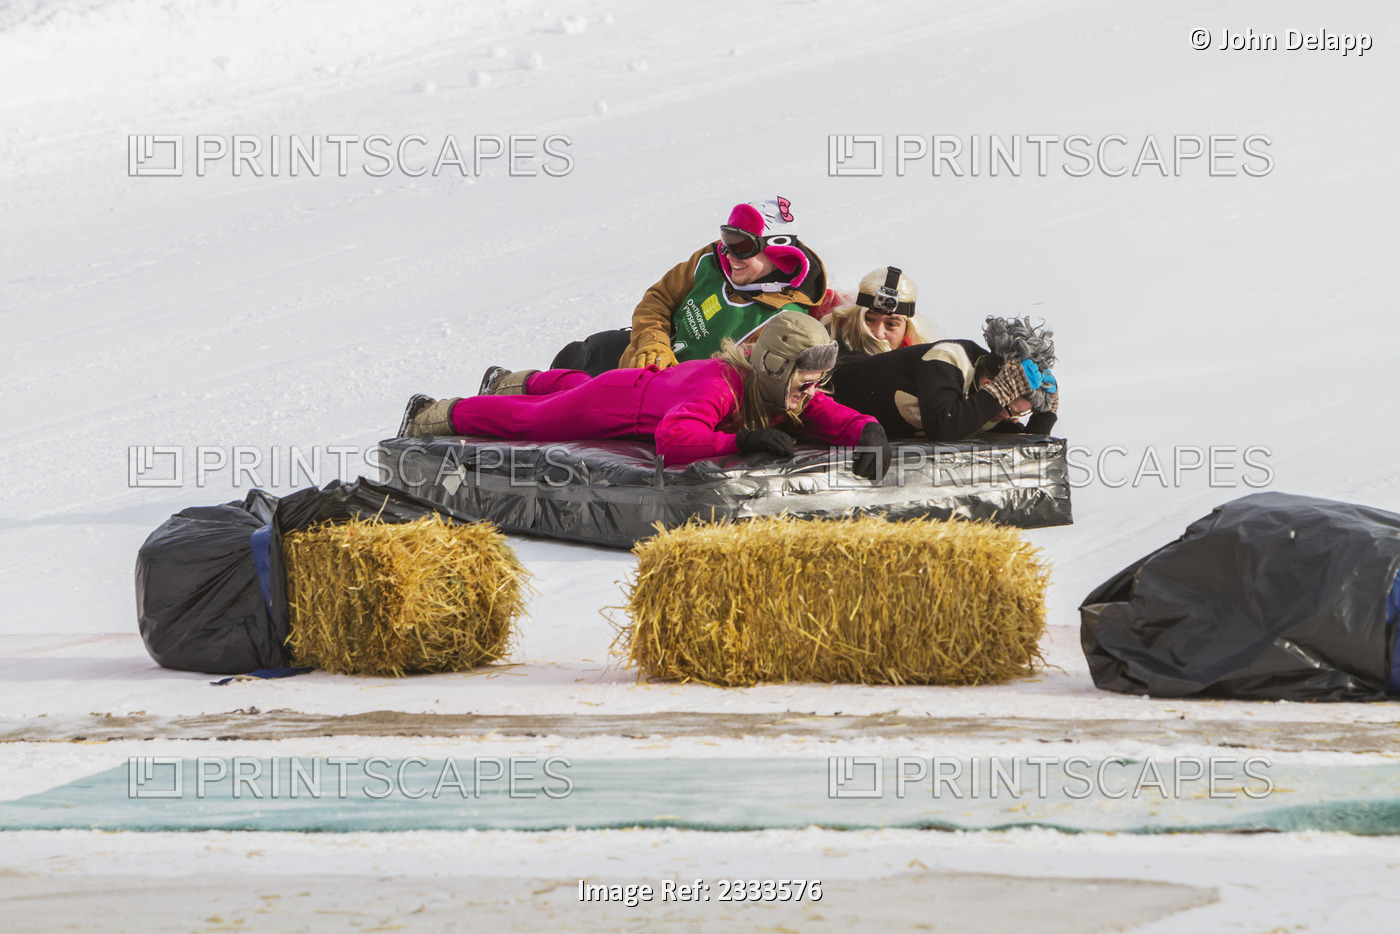 Competitors In The Bed Race Slide Down A Ski Slope And Strike Straw Barriers At ...